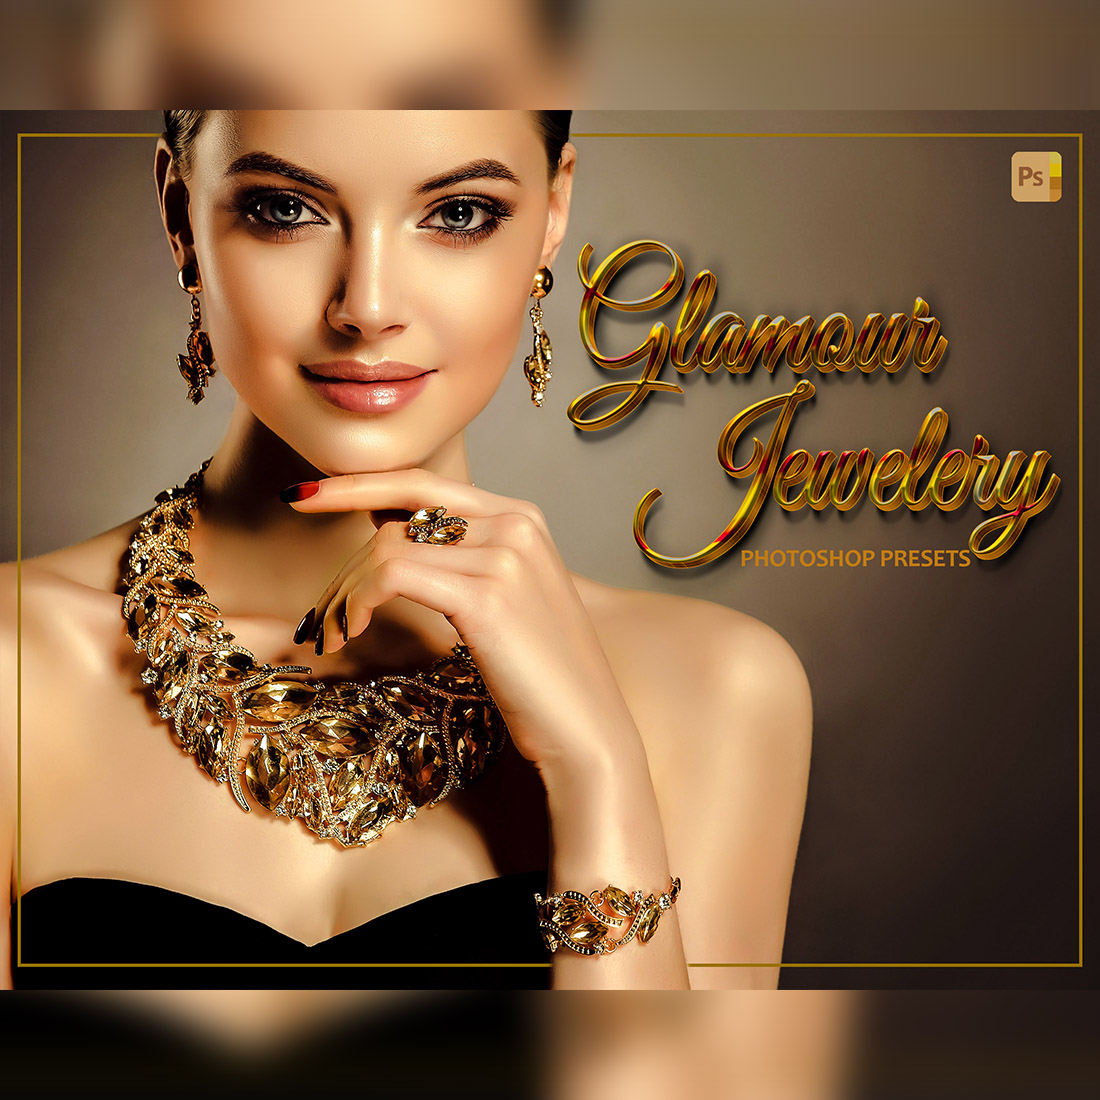 12 Photoshop Actions, Glamour Jewelry Ps Action, Gold ACR Preset, Jewellry Ps Filter, Portrait And Lifestyle Theme For Instagram, Blogger cover image.